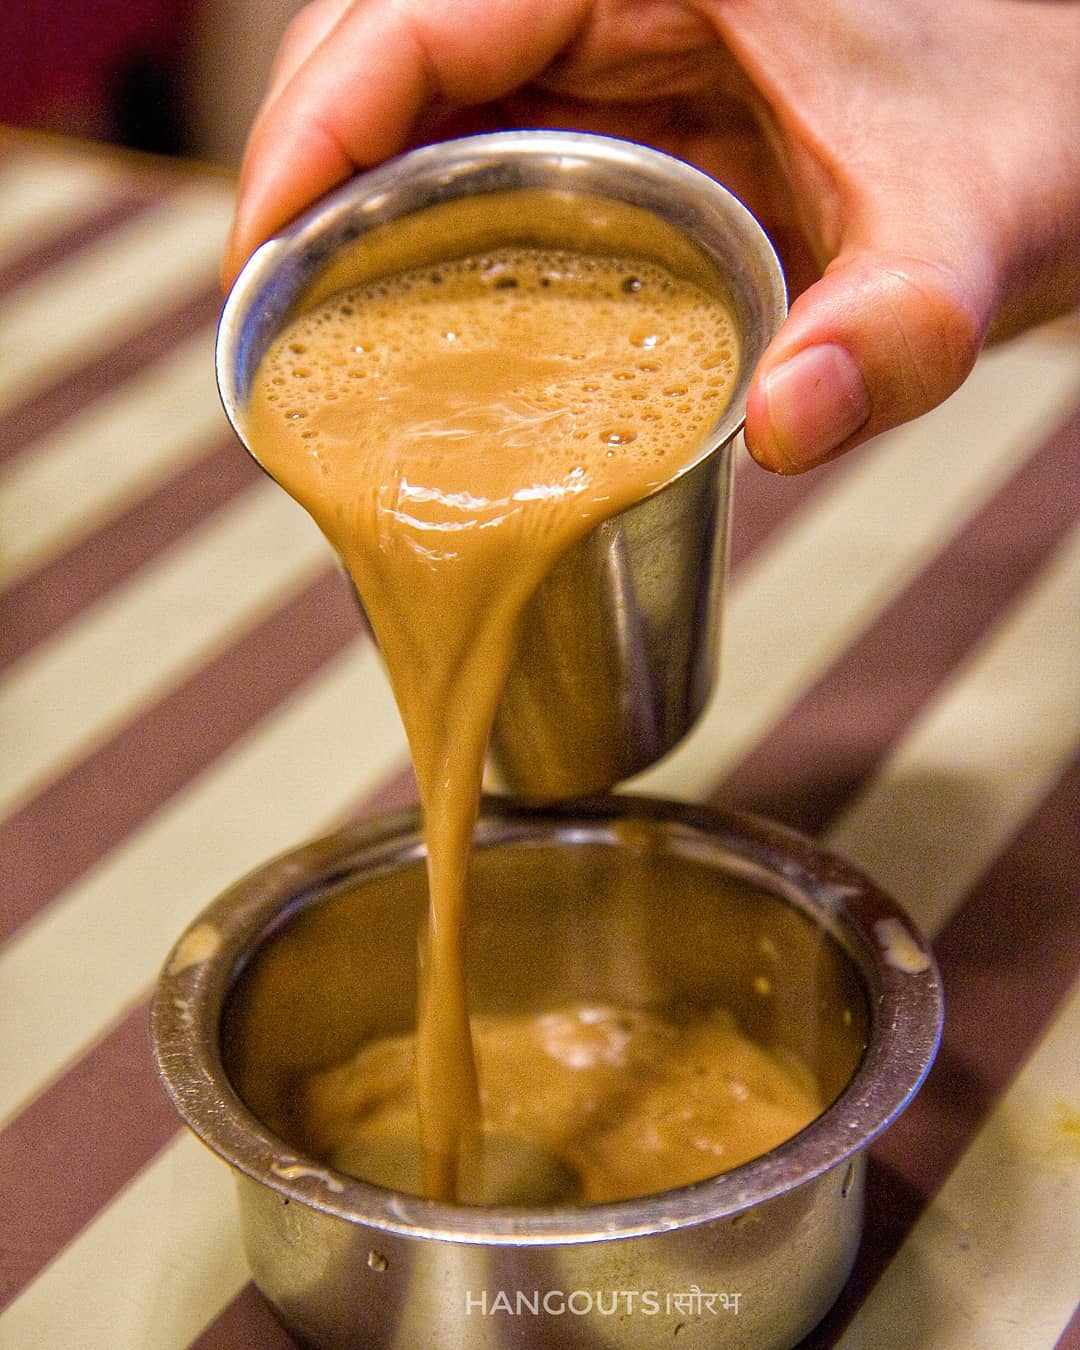 Filter Coffee was was brought from Yemen to India